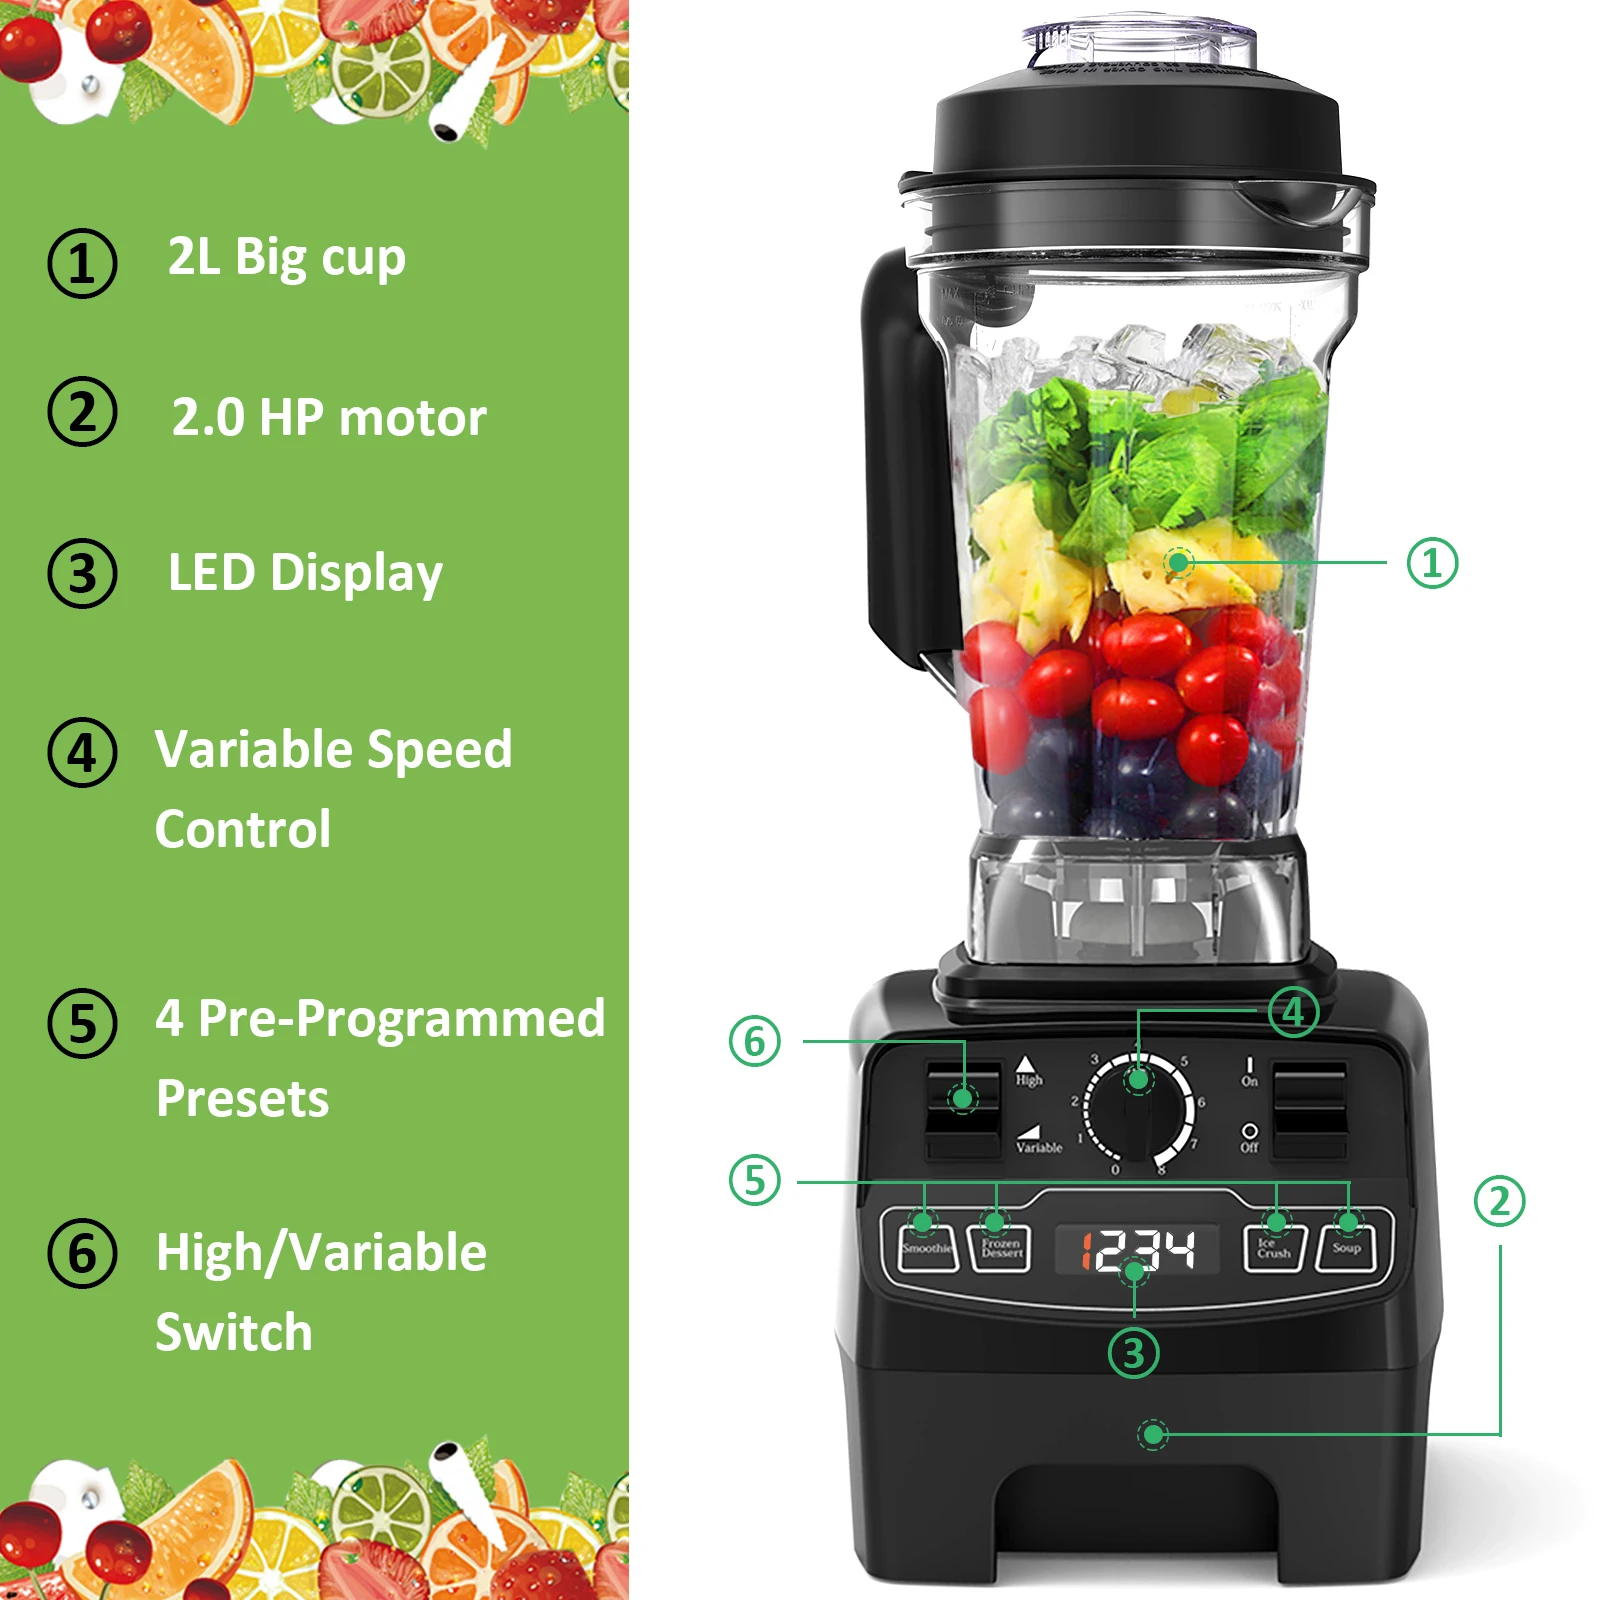 6 Sharp Blade for Ice/Nuts/Soup/Sauce Blender Smoothie Maker 2019 New Homegeek 2000W 8-Speed Smoothie Blender Commercial Blender with 32,000 RPM High Speed BPA Free Tritan Pitcher & Tamper 